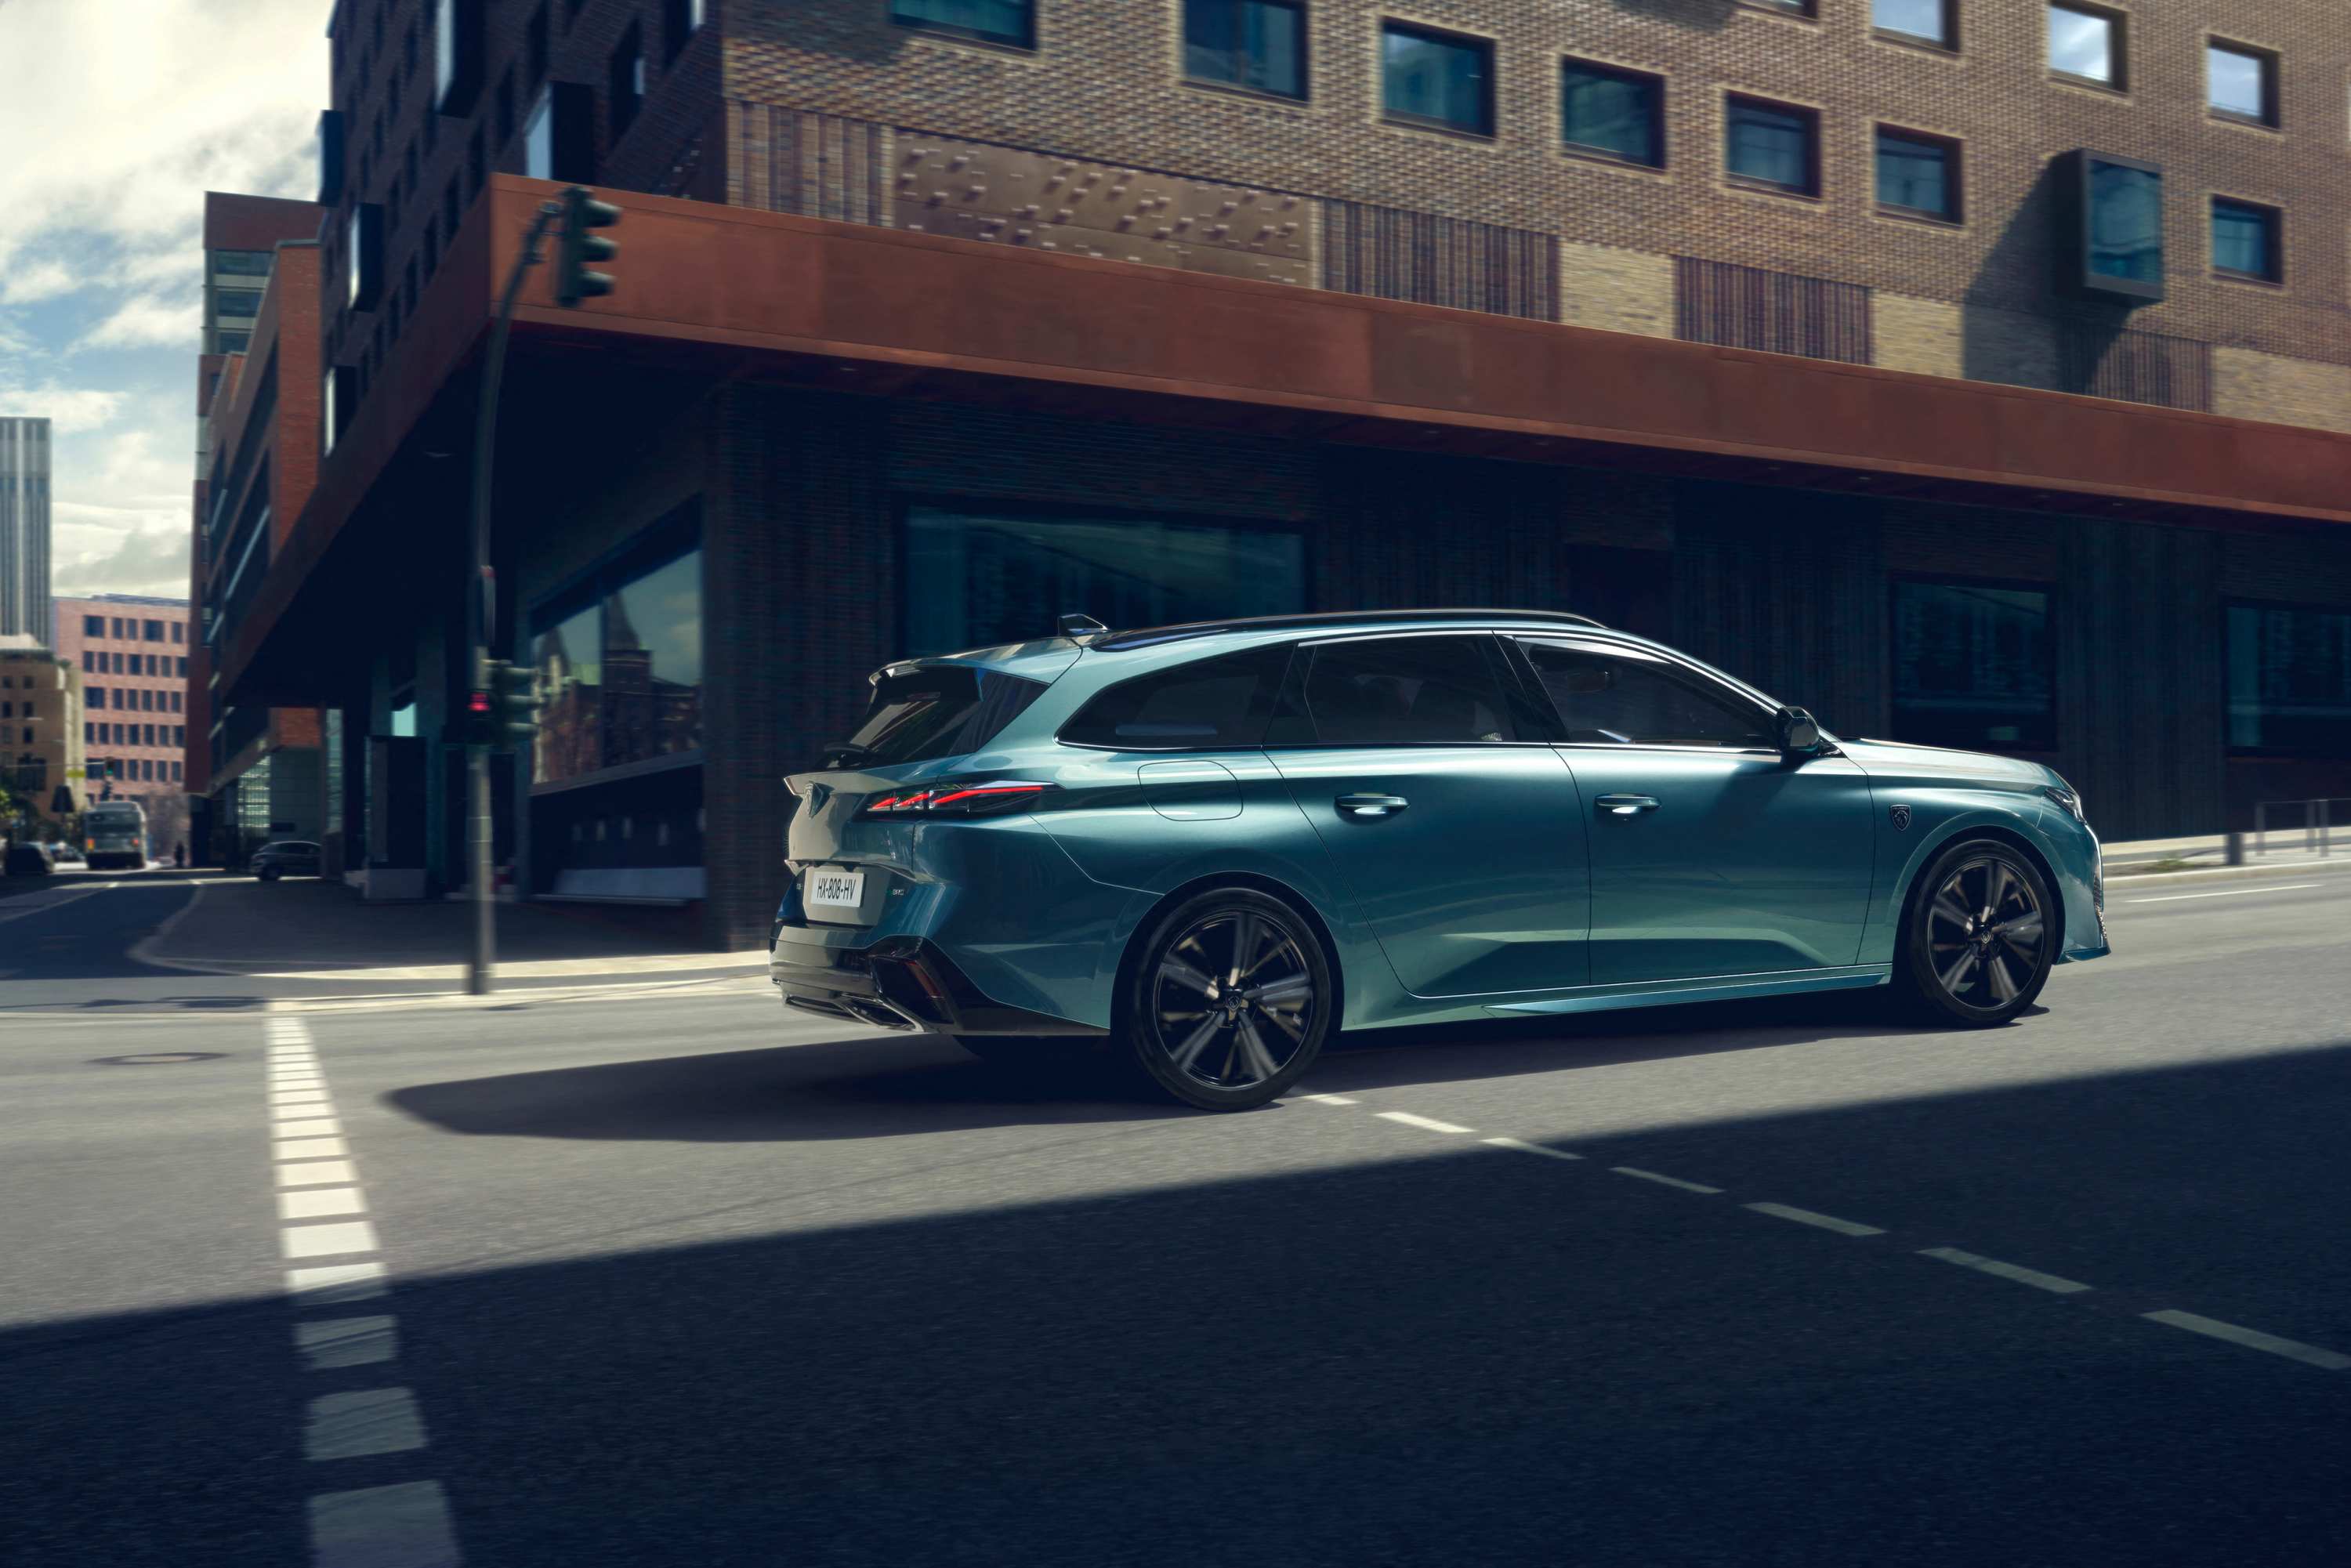 The all-new Peugeot 308 SW, to be launched in Australia in 2022.